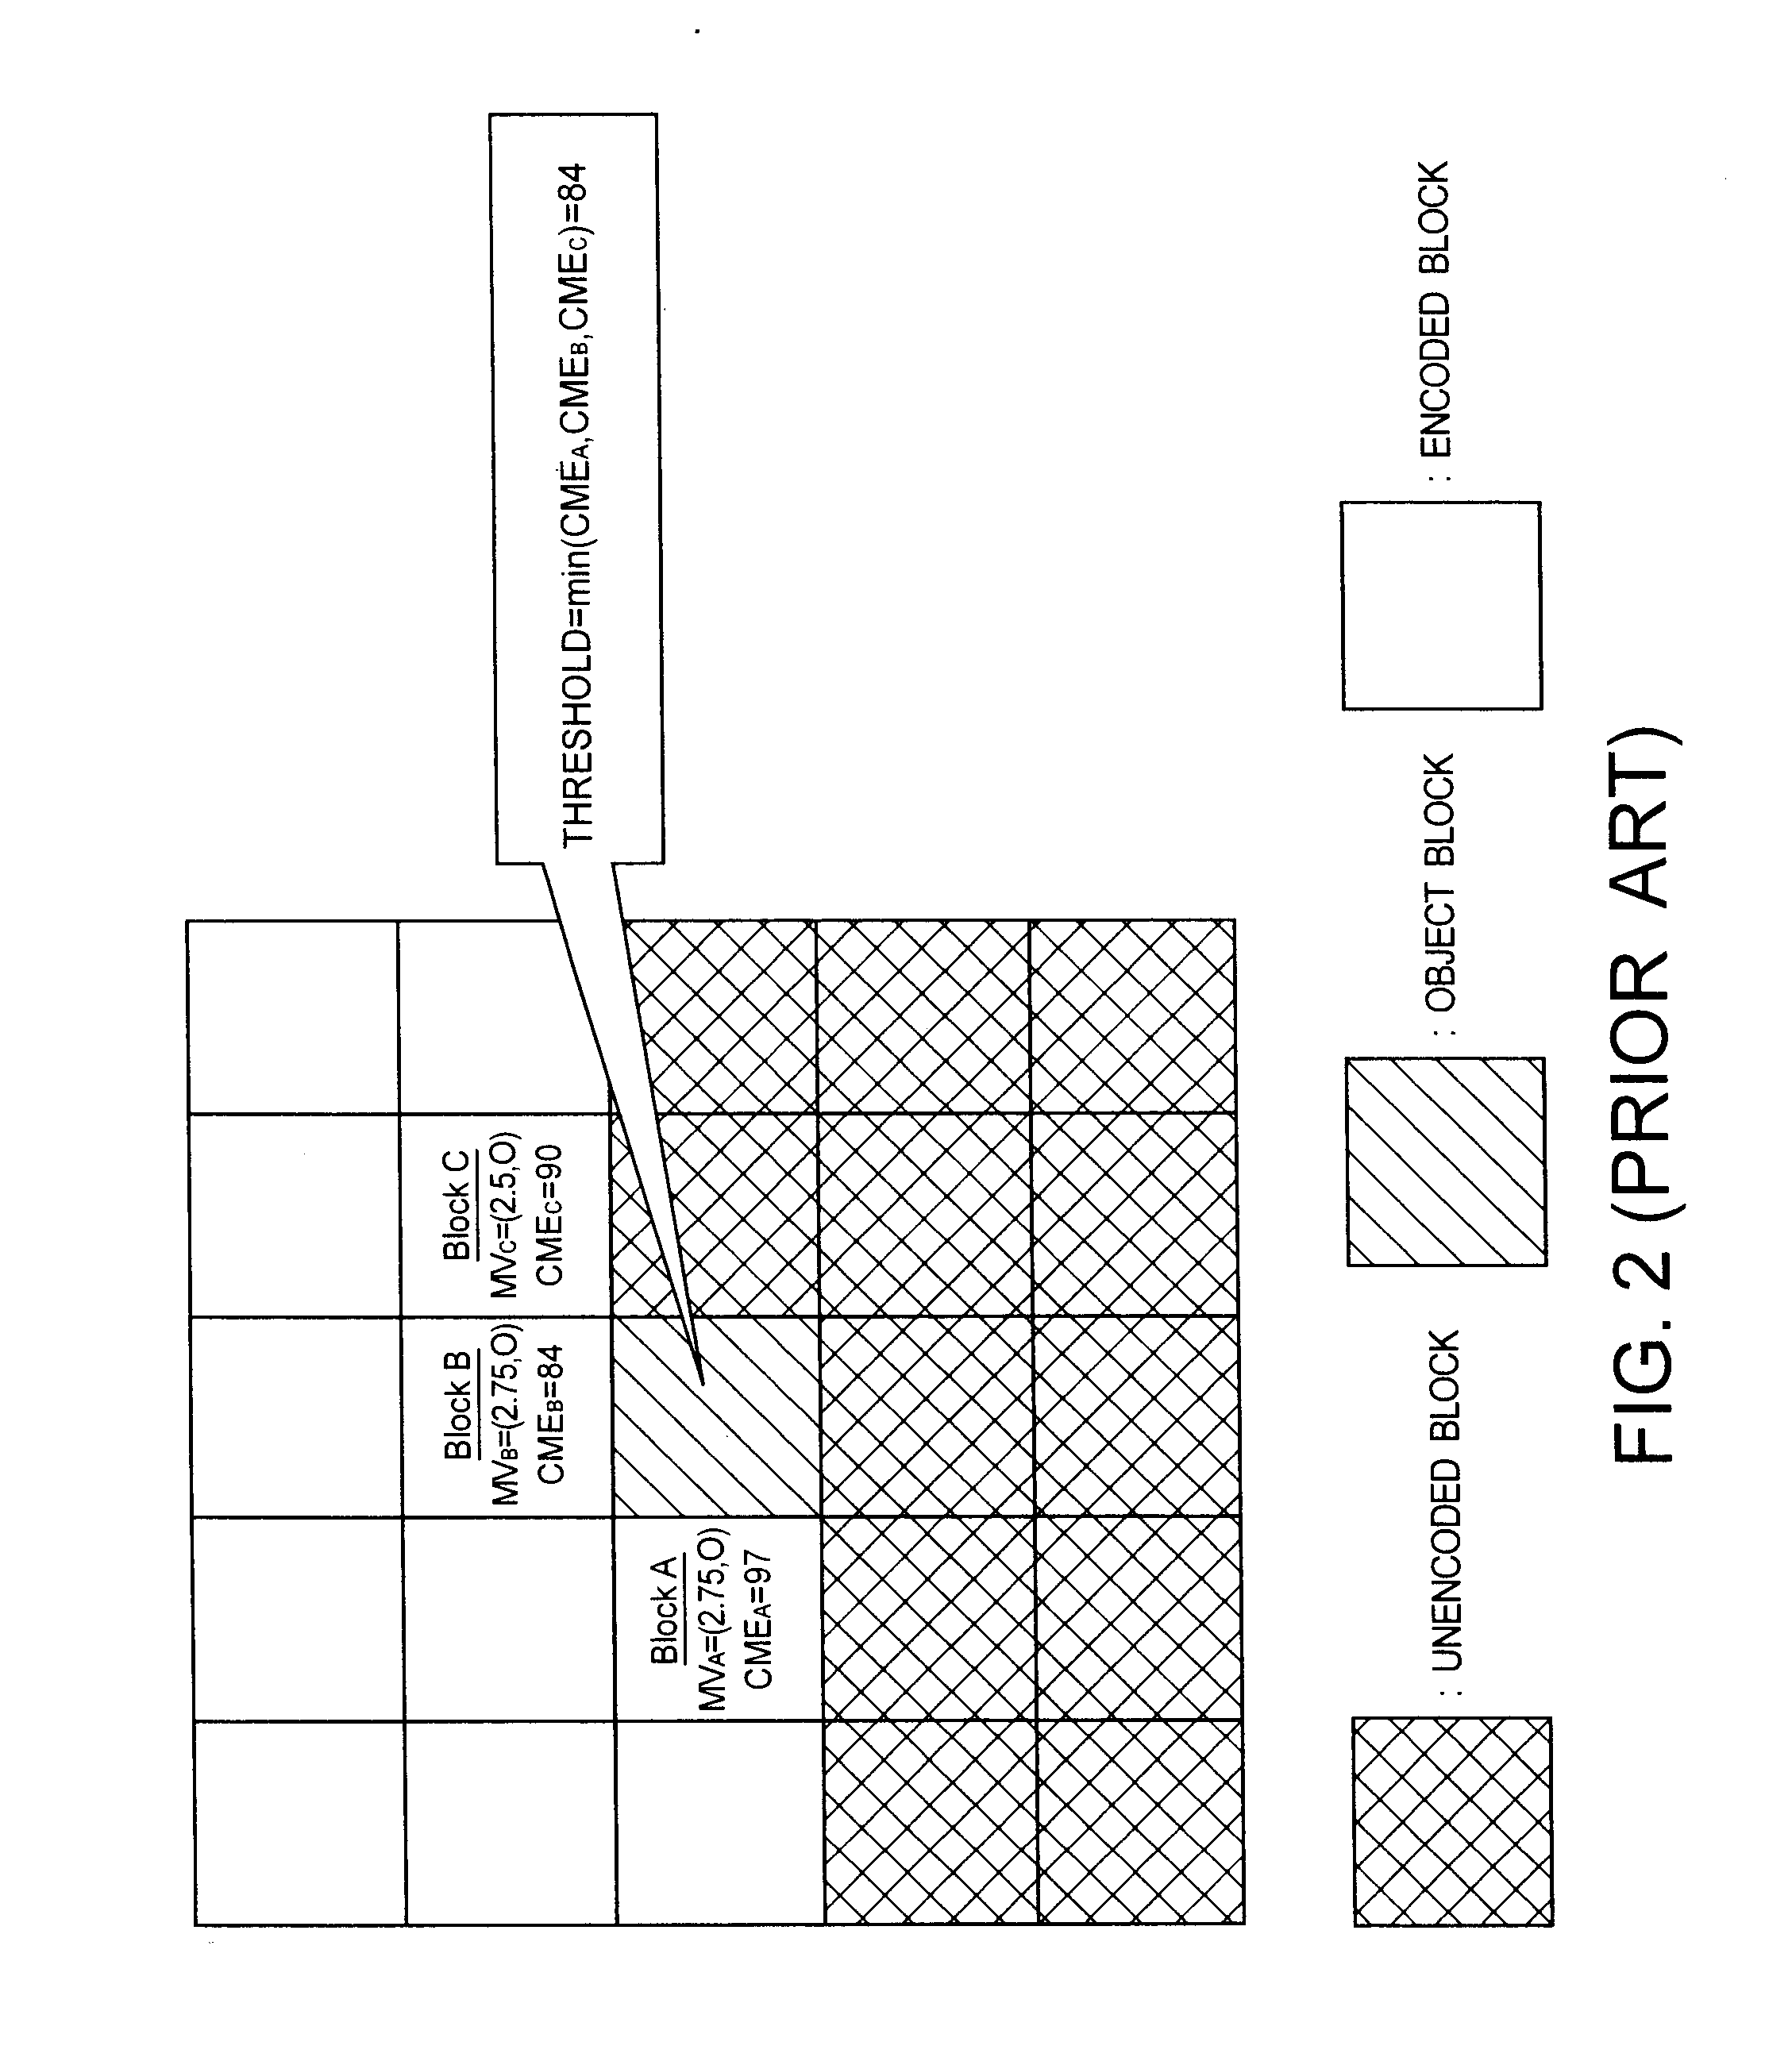 Motion vector detection apparatus and method